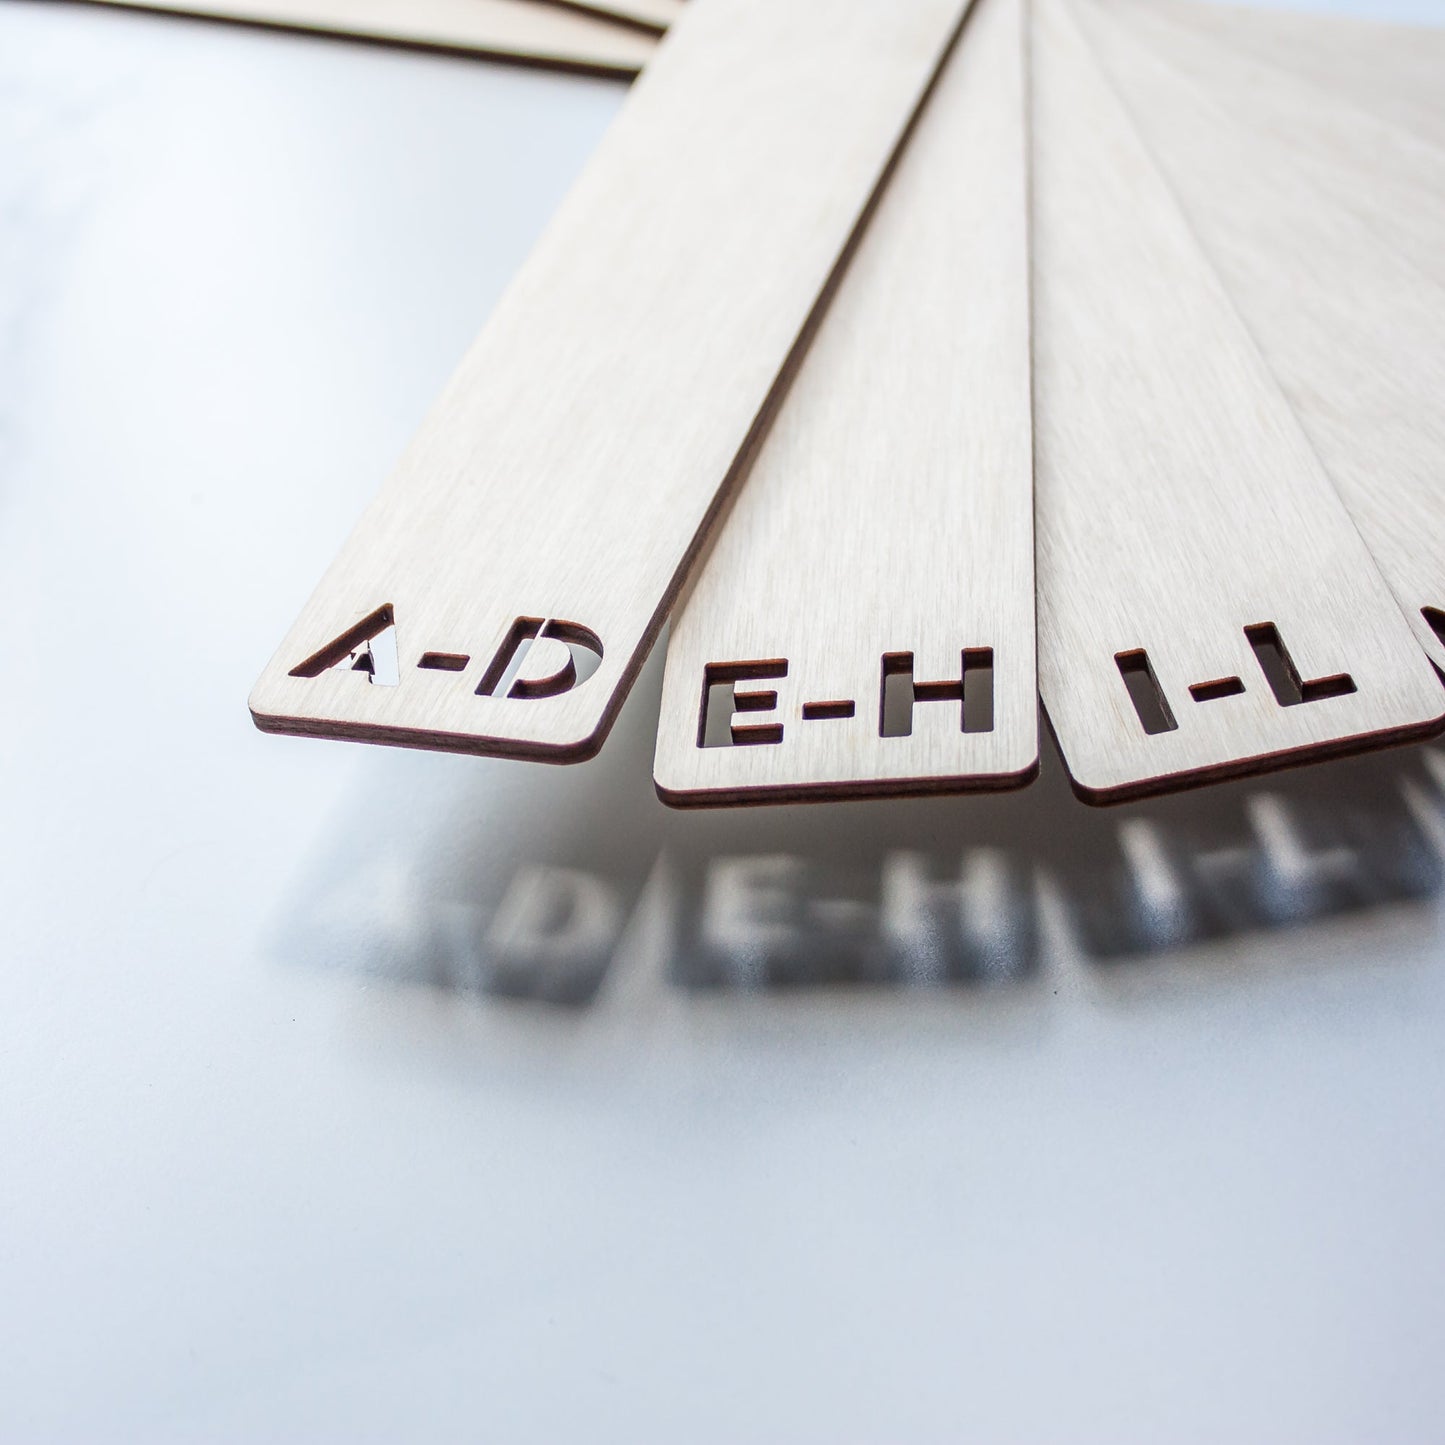 Vinyl Record Dividers - Laser Cut Wood - A-D, E-H, I-L cut out letters by LeeMo Designs in Bend, Oregon